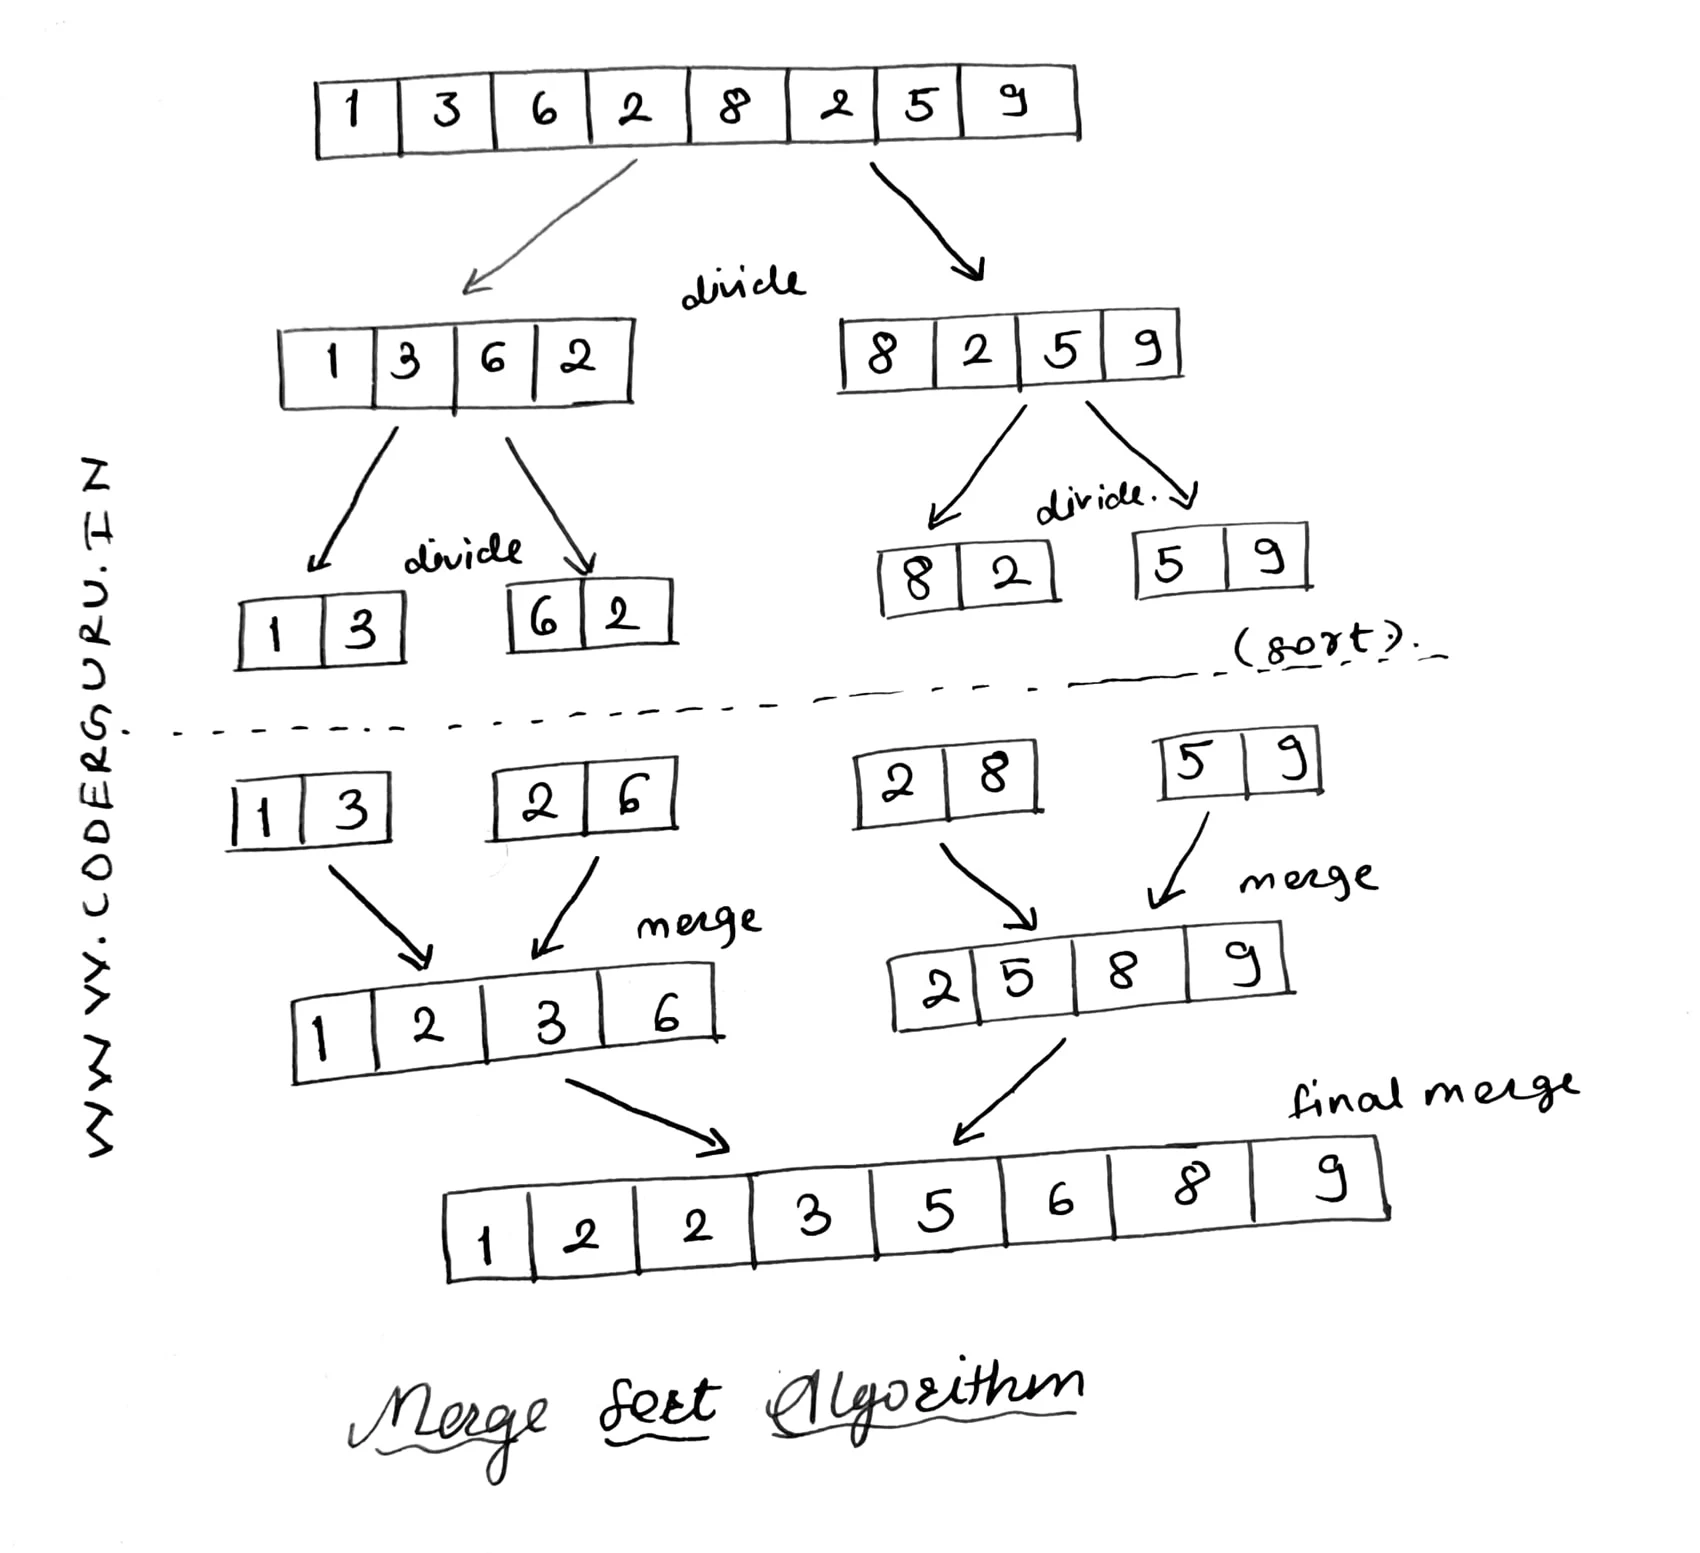 Example for Merge Sort